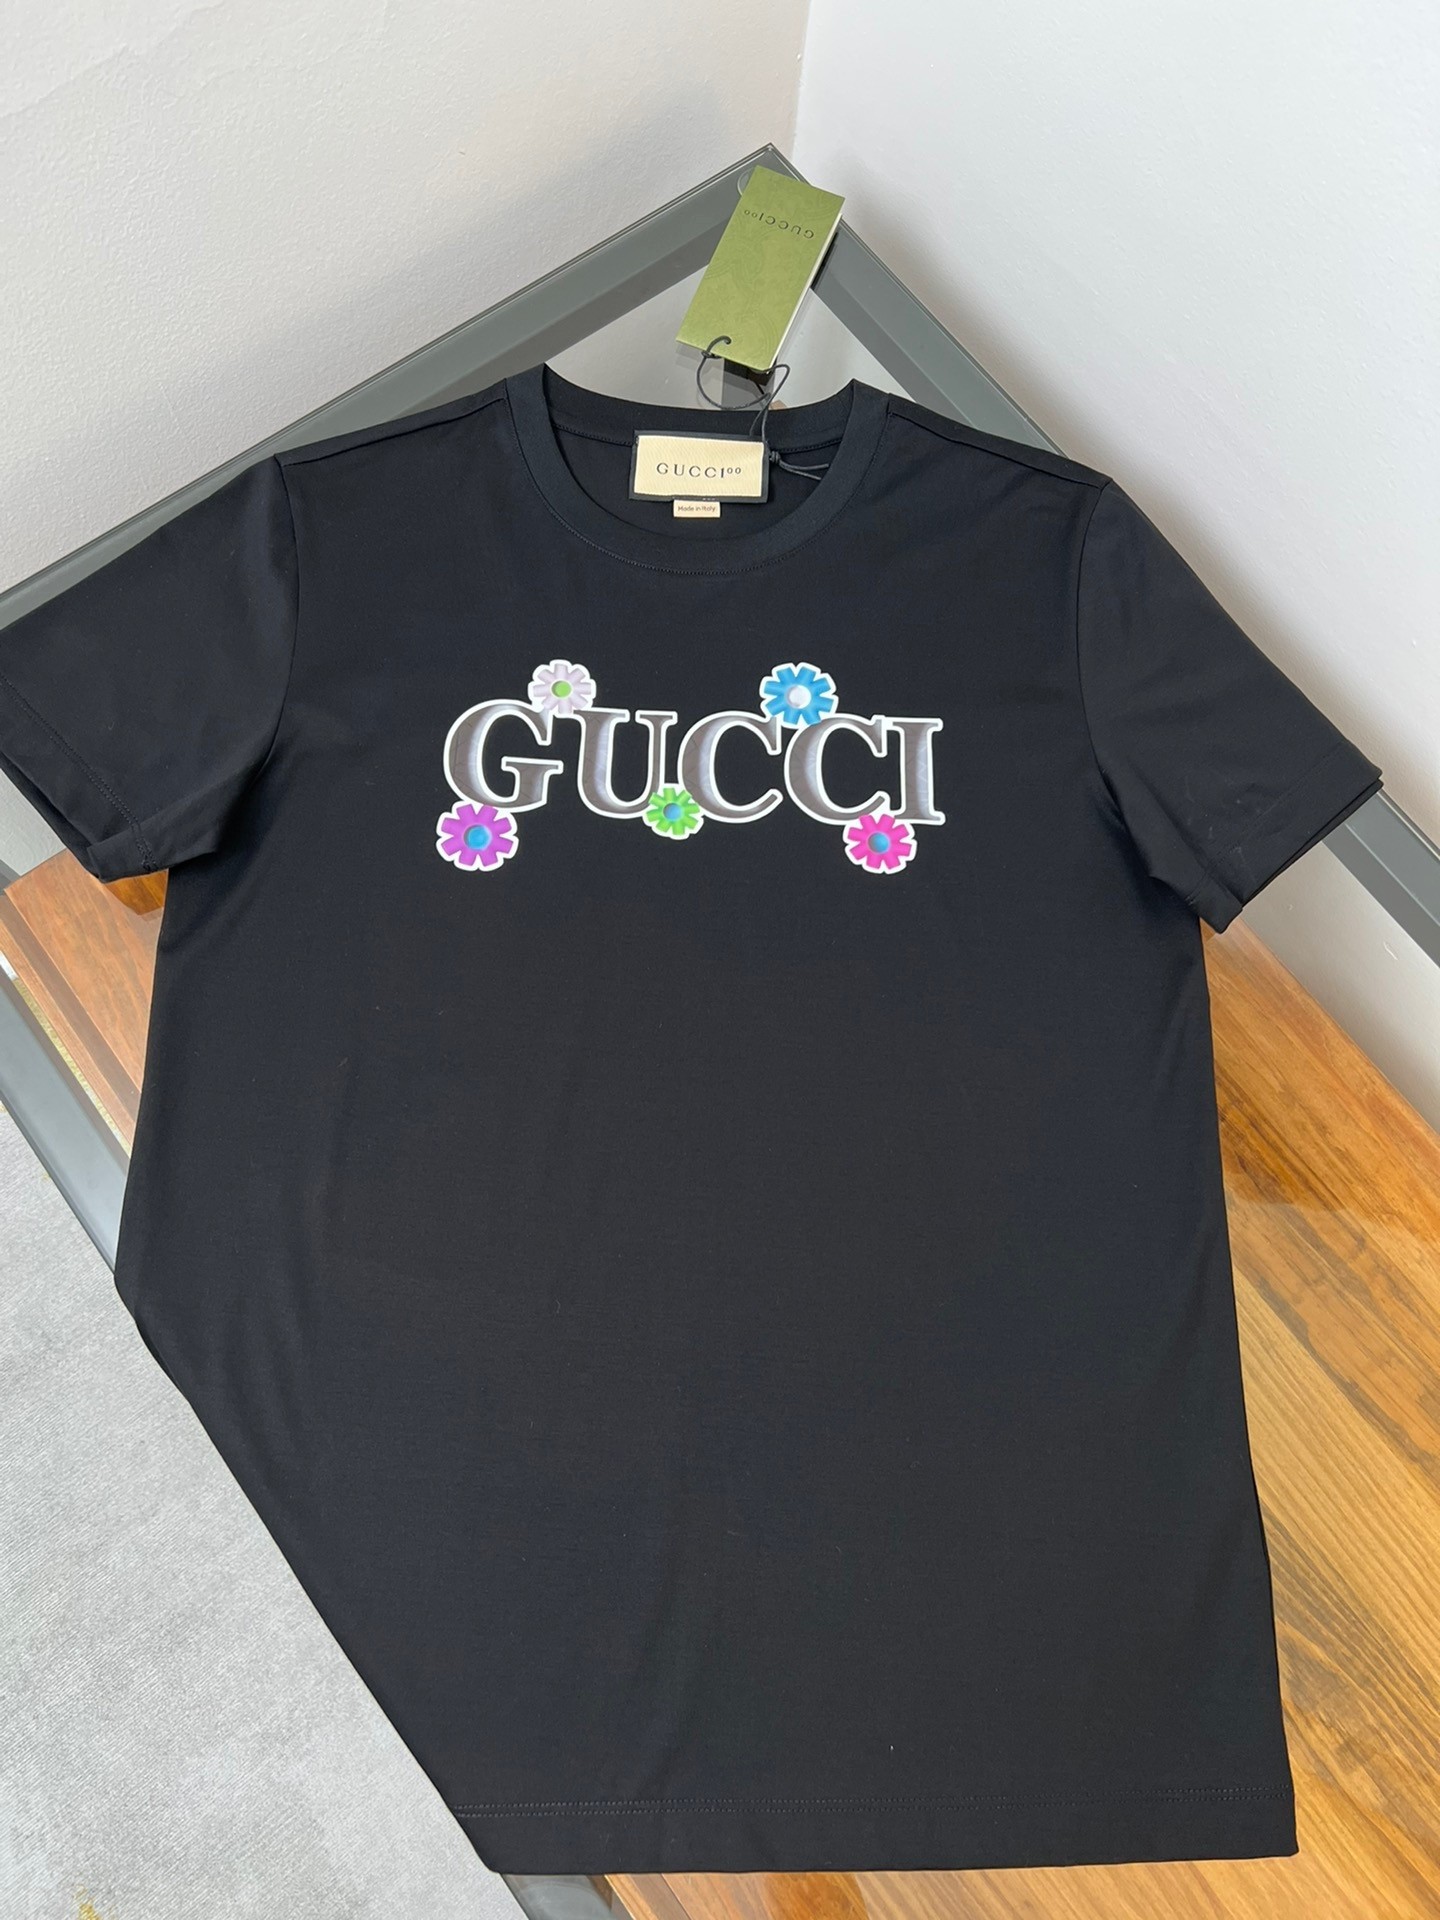 Gucci Unisex Flower Printed Leisure Breathable T-shirt